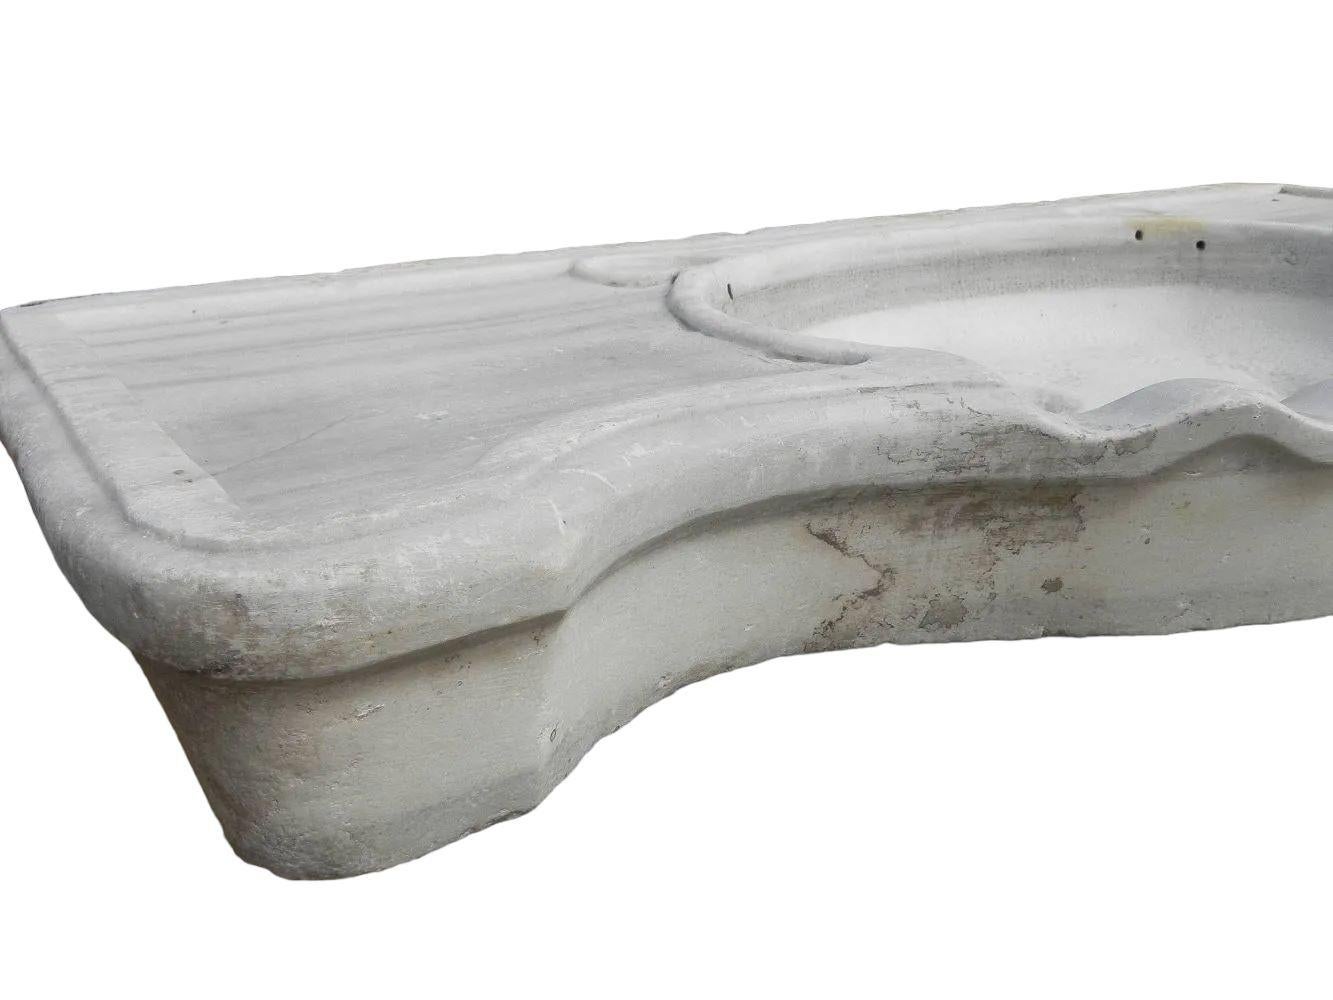 This period Italian classical sink is cut from one single block of white marble, these designs have not changed since Greek and Roman times, it carries superb artistic merit easily fitting in with old and new buildings.

Custom versions available in